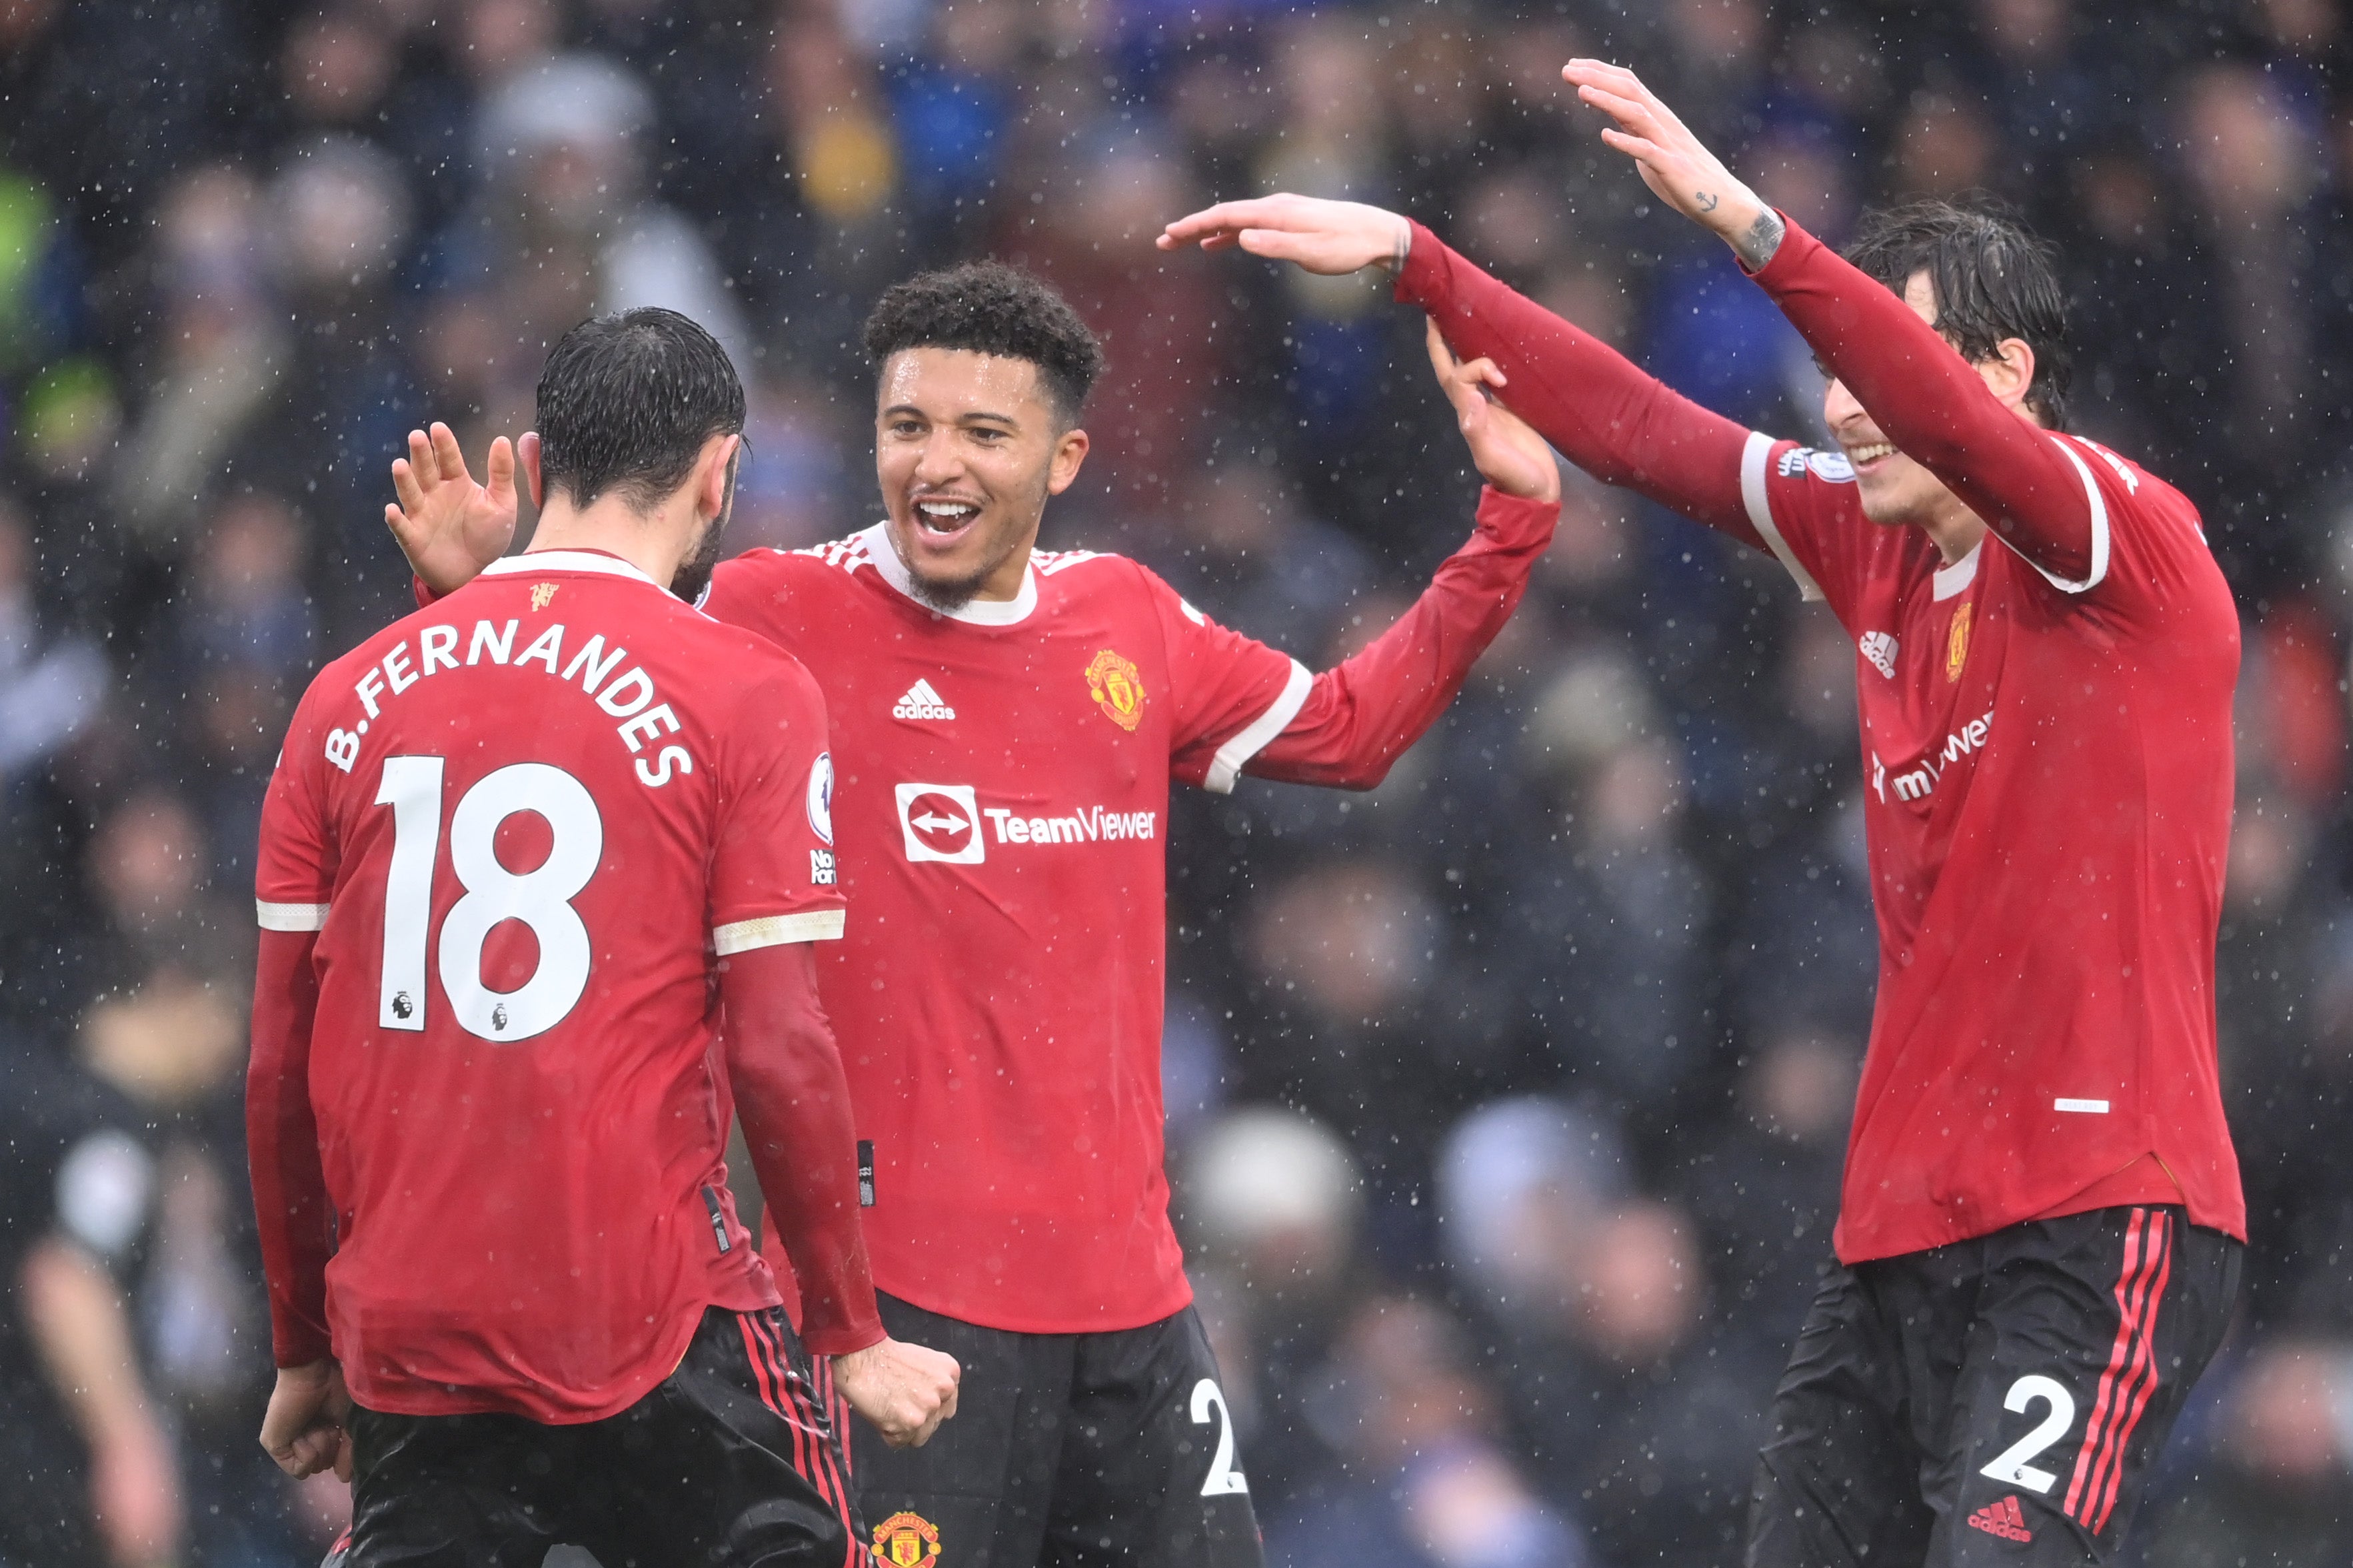 Jadon Sancho was superb as Manchester United opened up a four-point lead